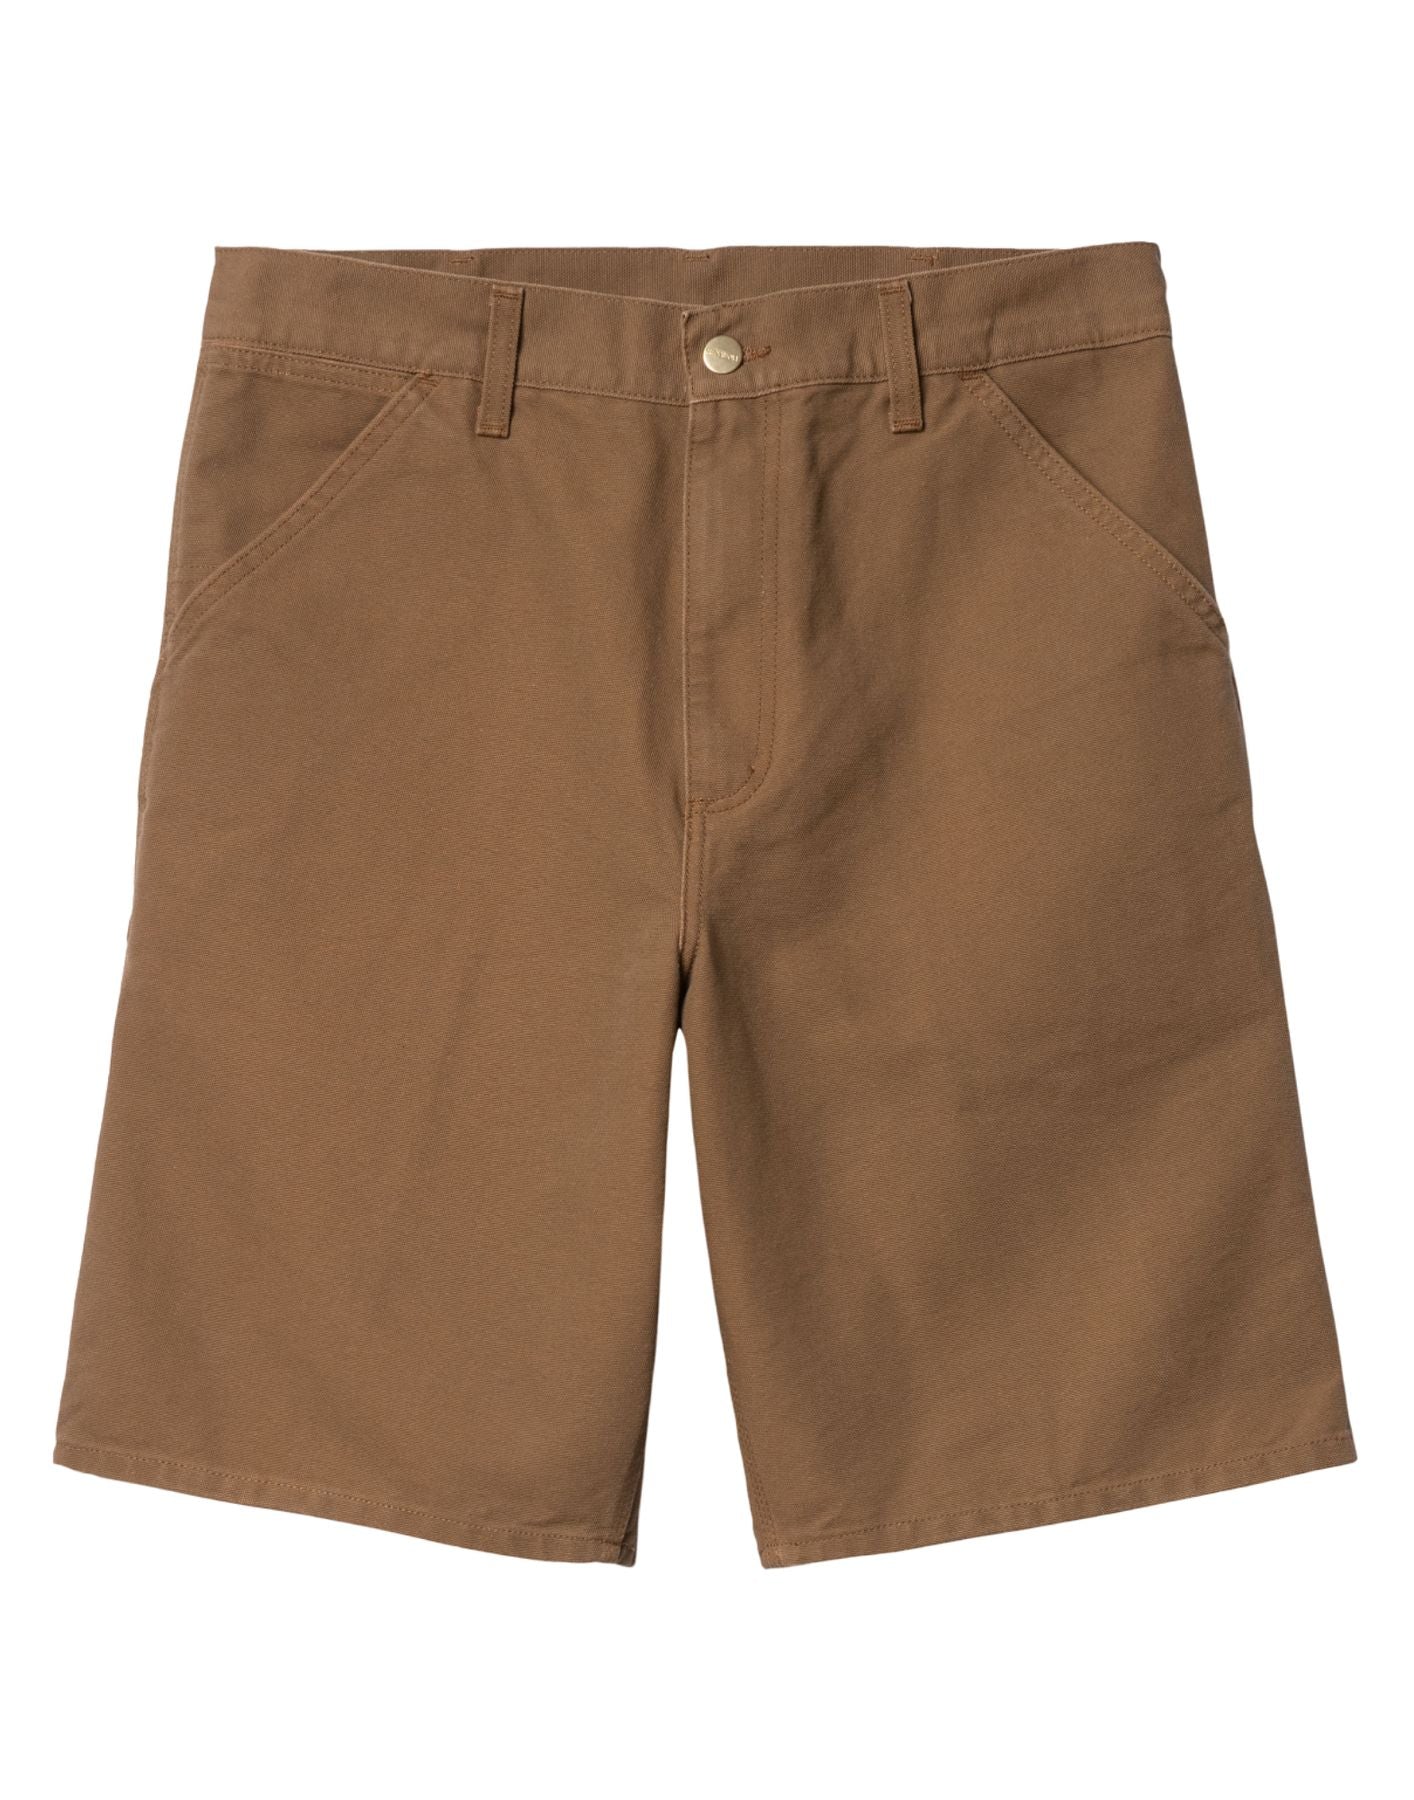 Shorts pour homme I027942 HZ02 CARHARTT WIP